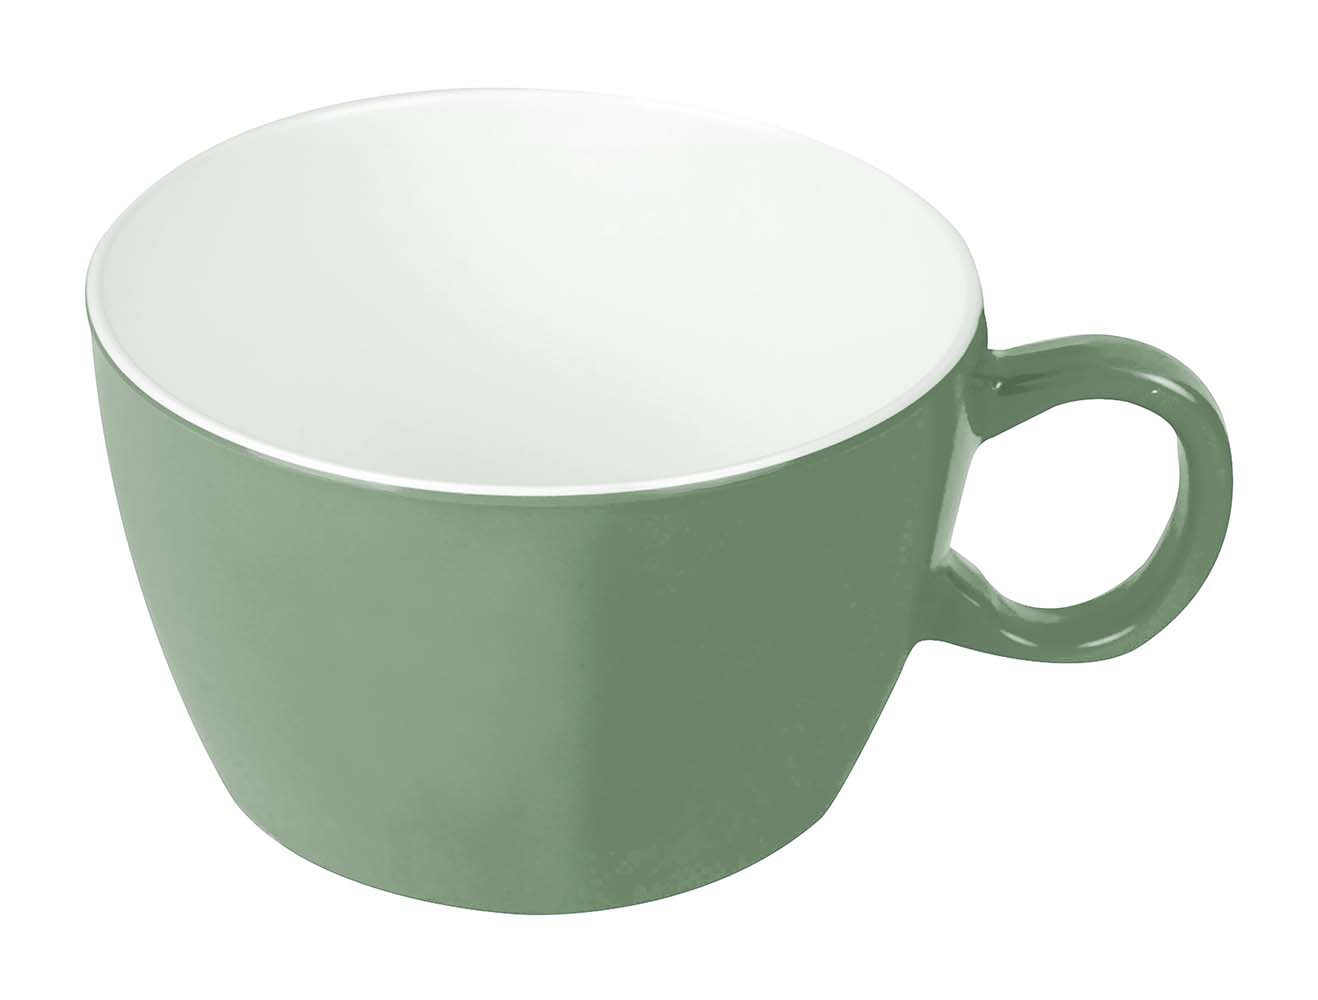 6181576 Bo-Camp - Soup bowl - Two-tone - Melamine - 4 Pieces - Green